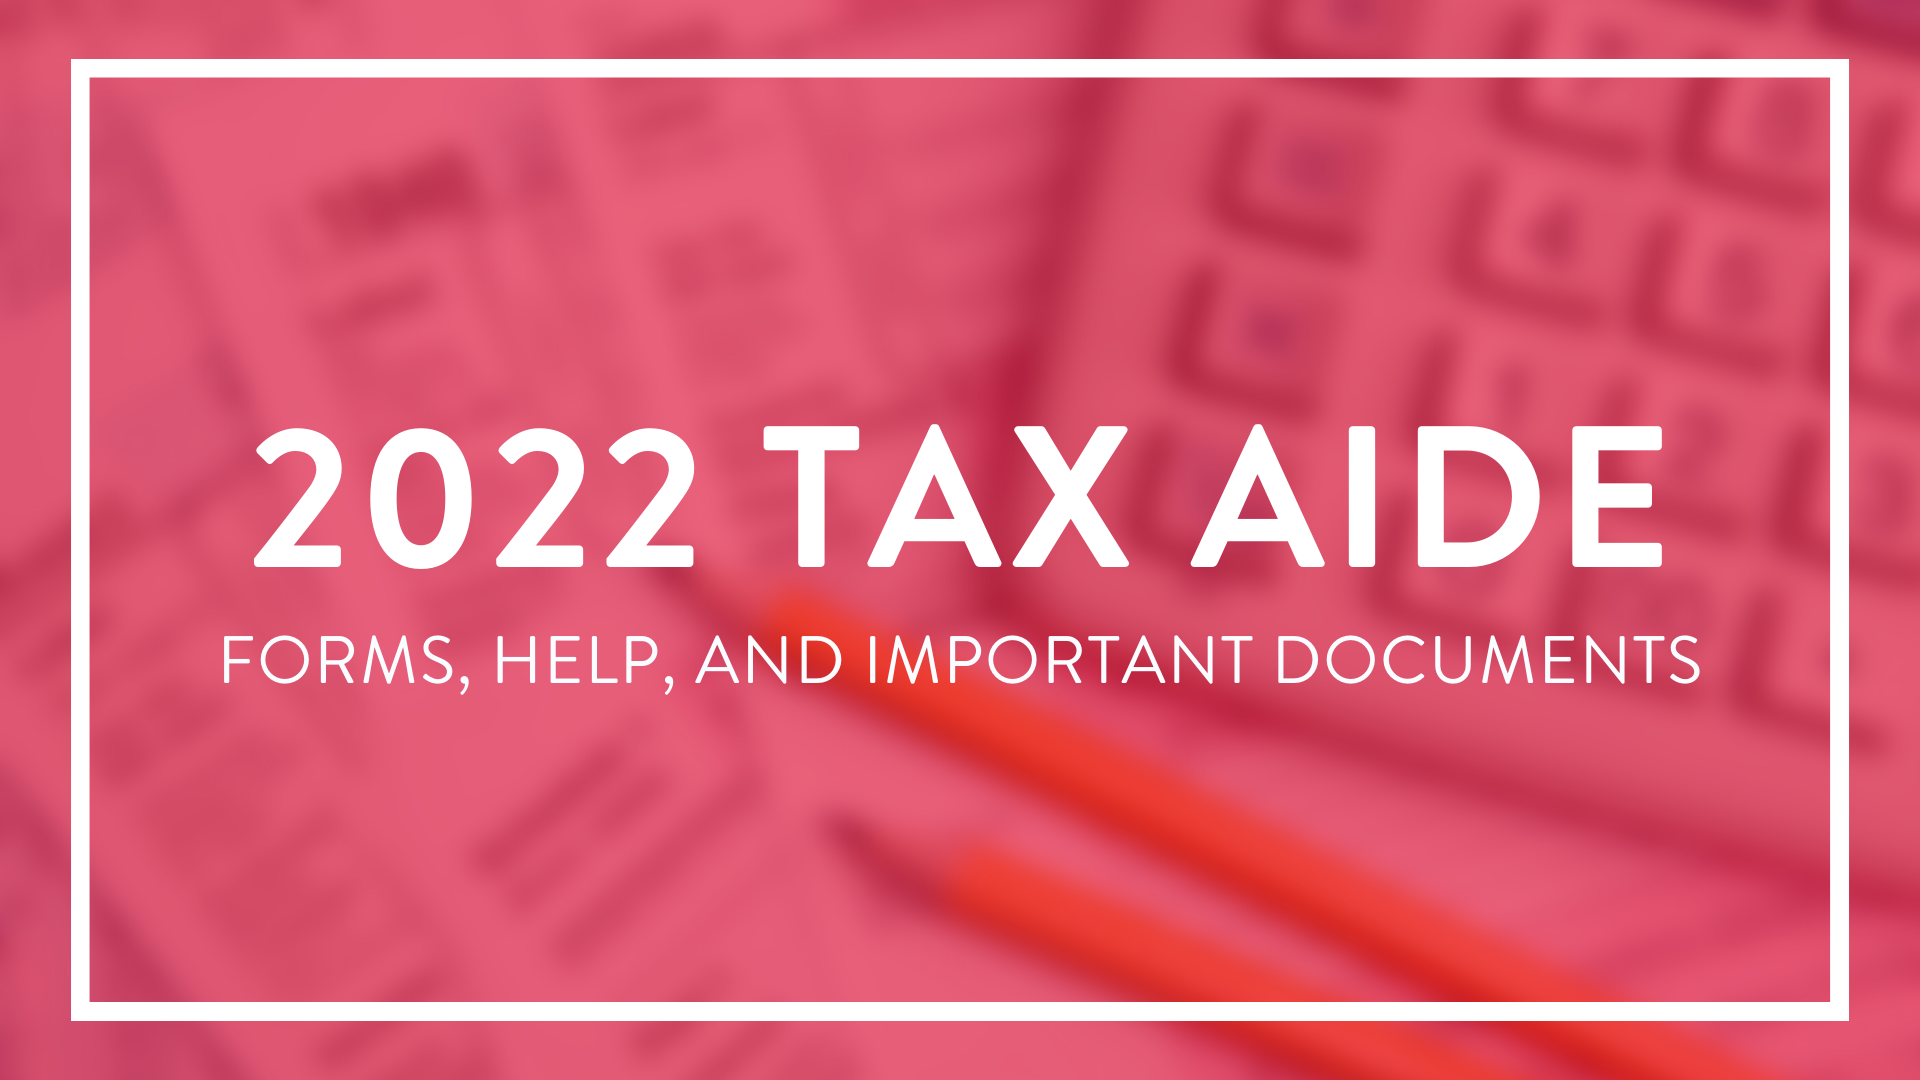 Tax Aide Resources